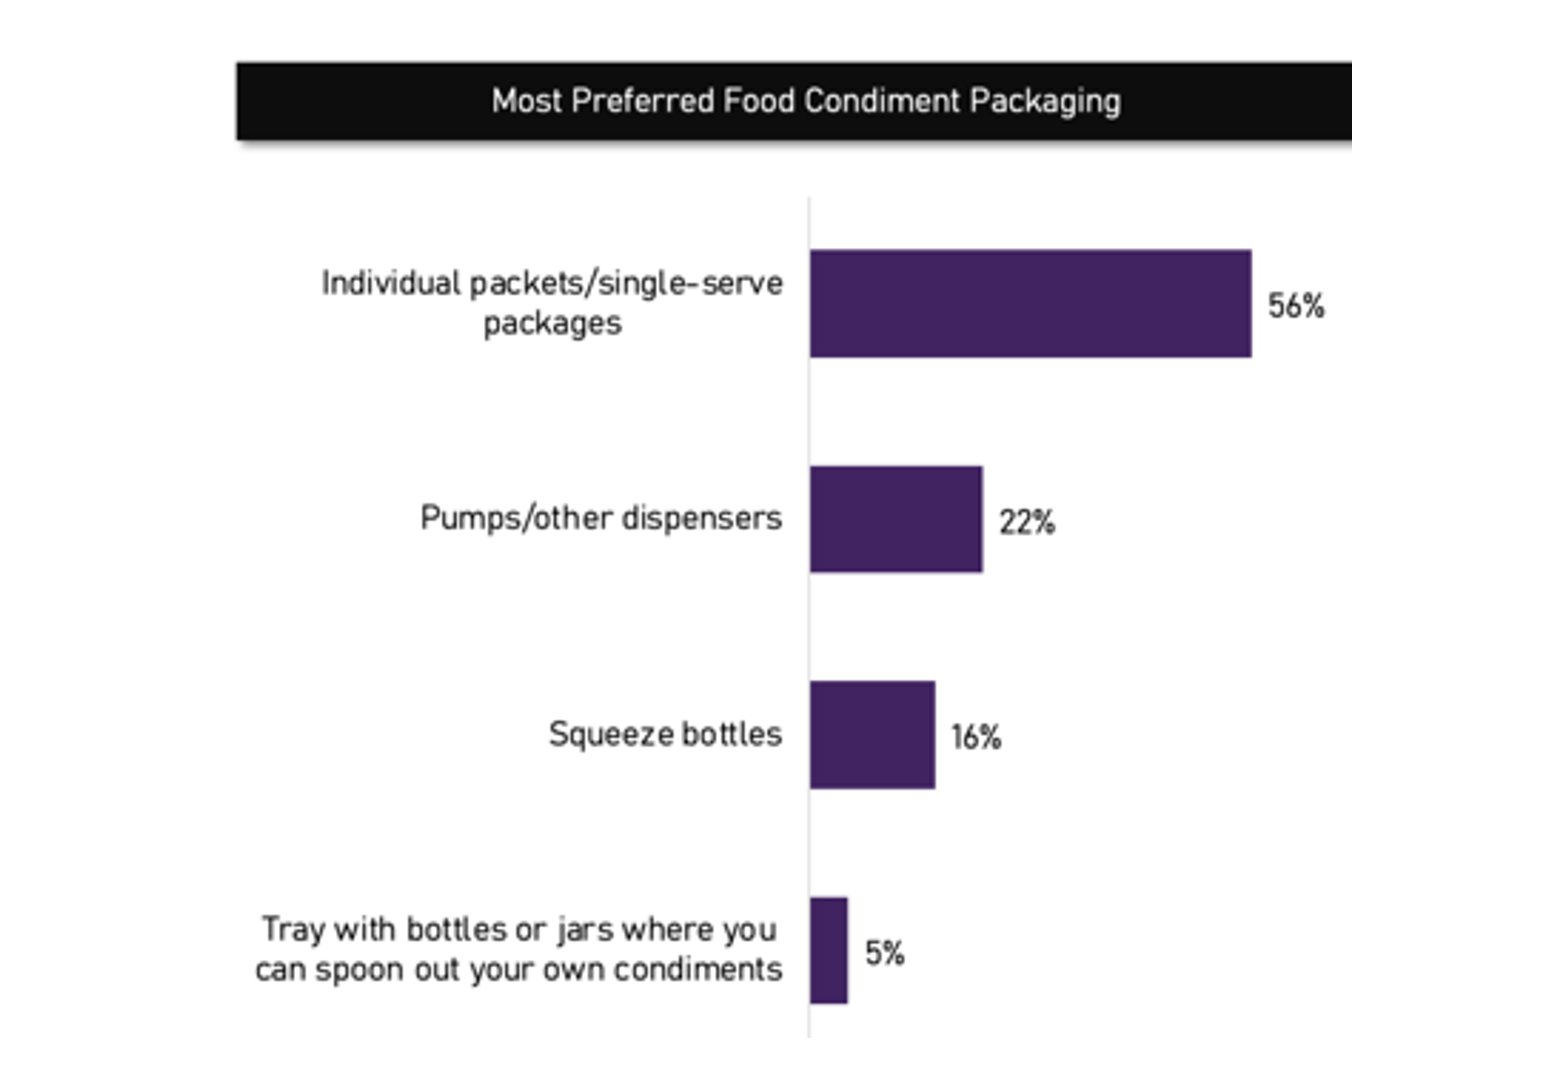 Consumers prefer portion control packaging by more than two-to-one for their condiments based on a Datassential survey.